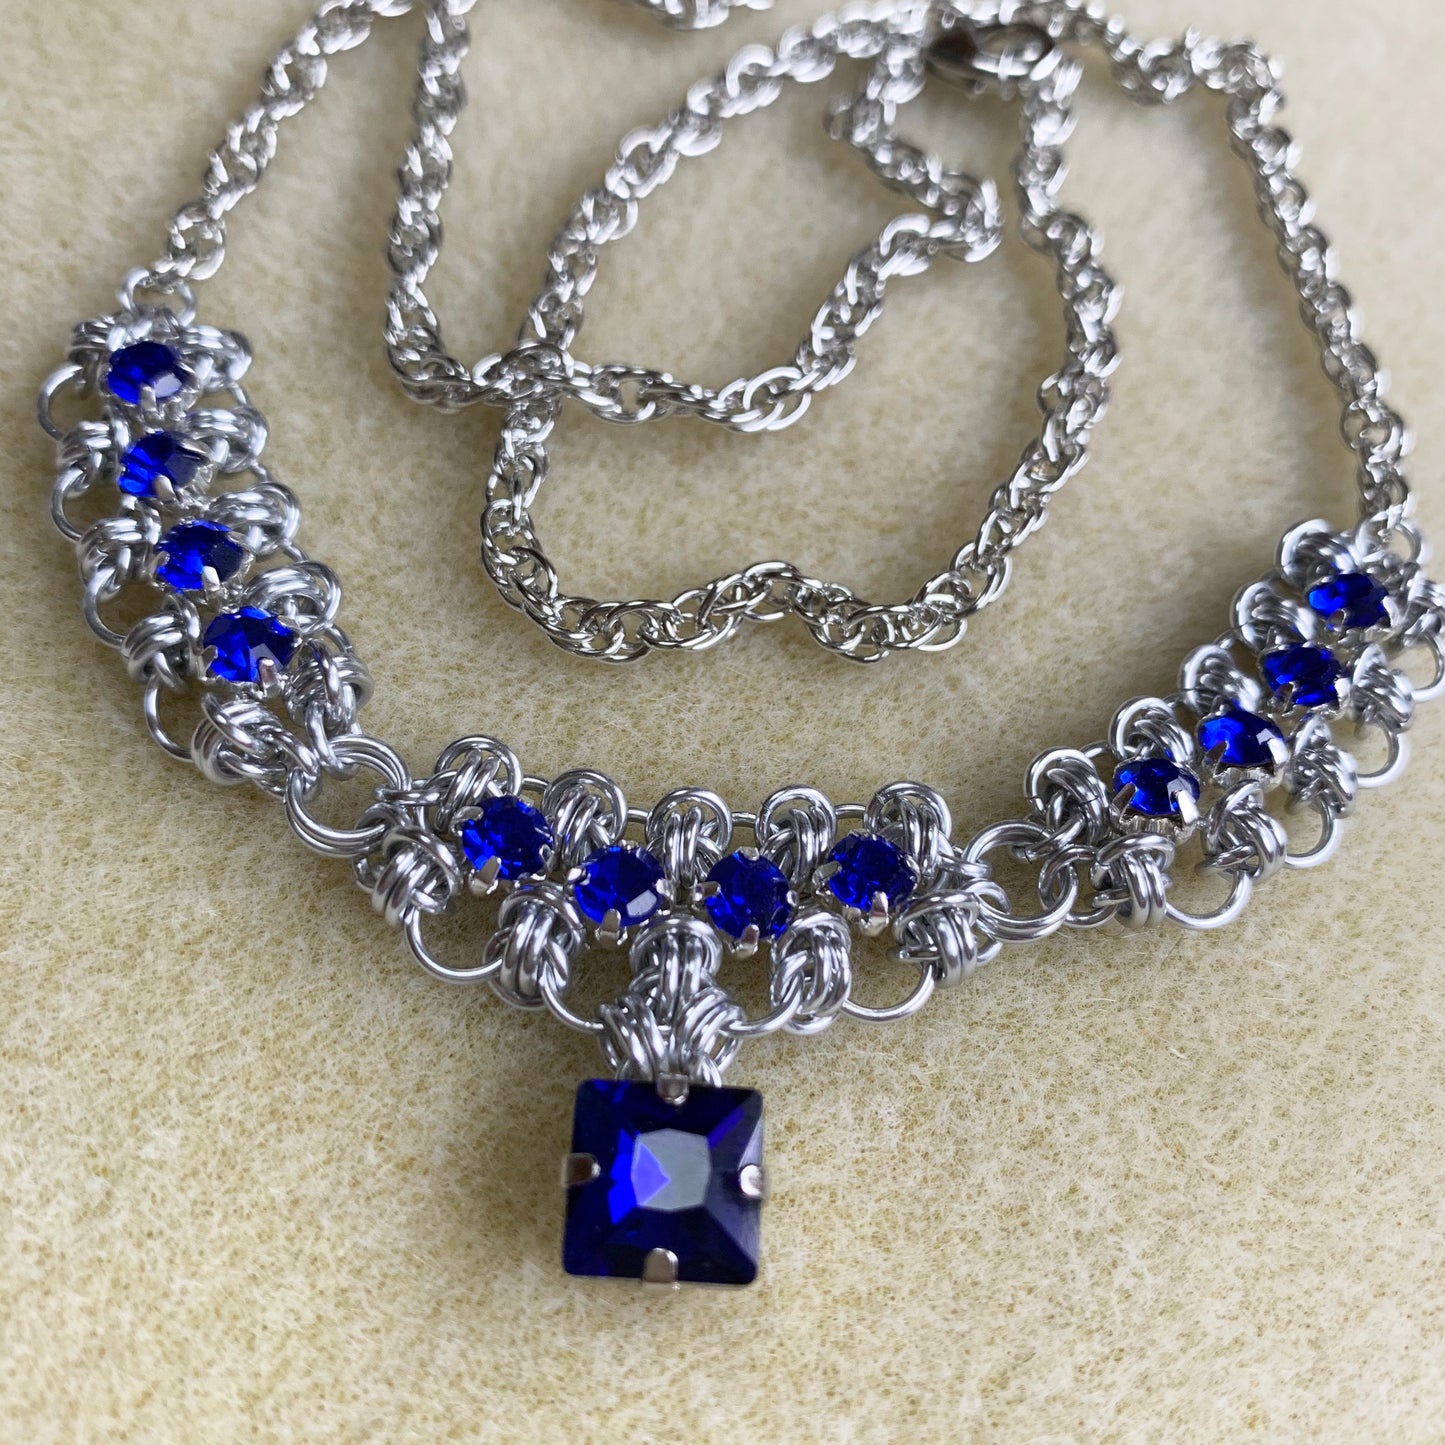 Barrel Weave Scalloped Rhinestone Necklace Kit with Video - Silver & Sapphire